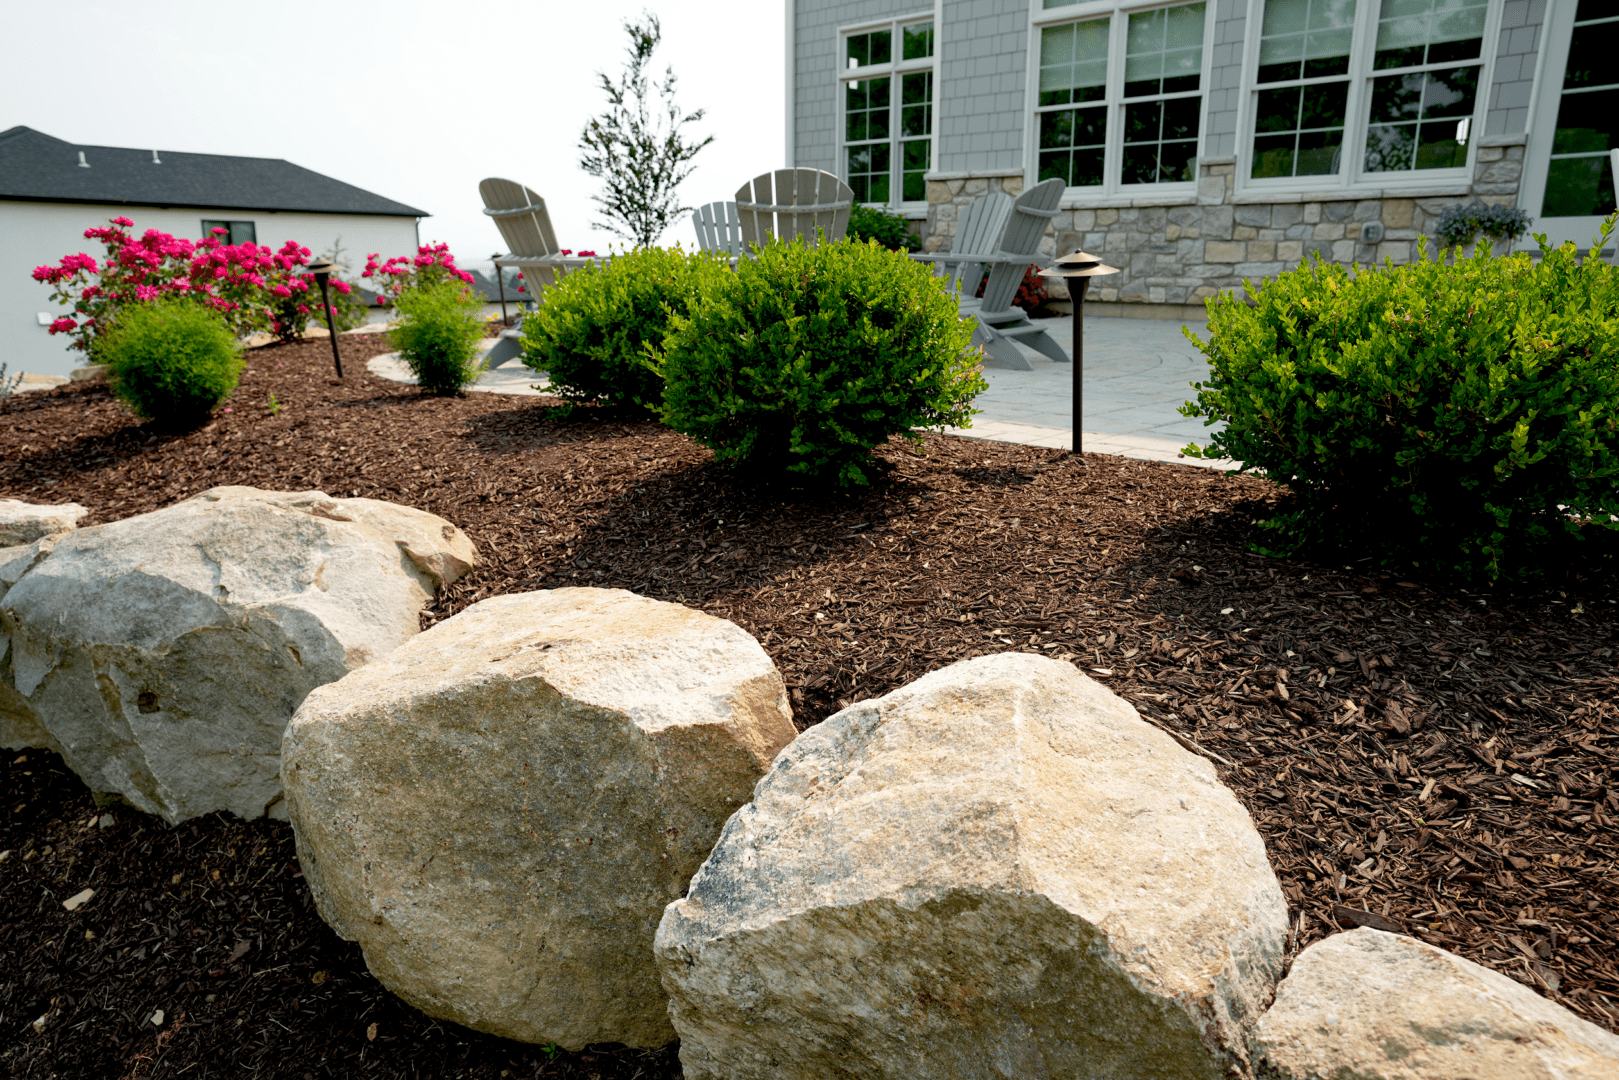 A boulder garden in front of a house.